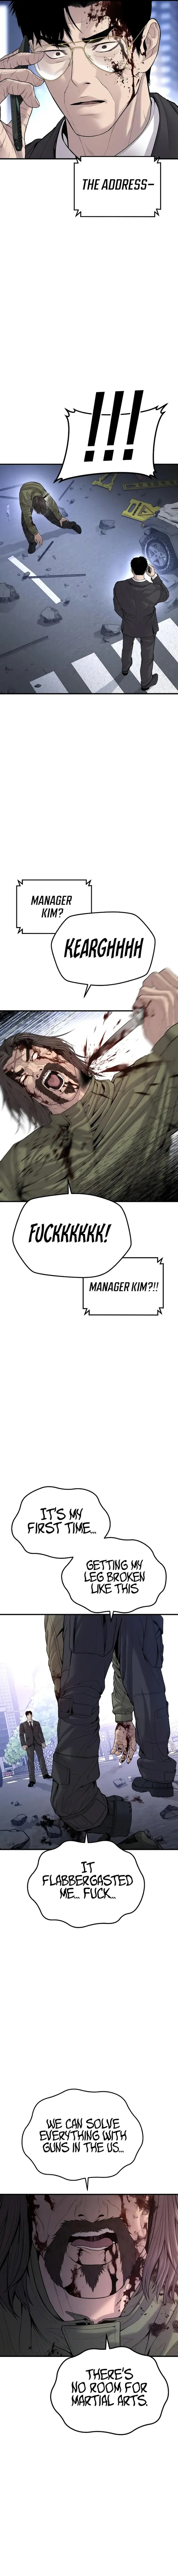 manager_kim_100_4